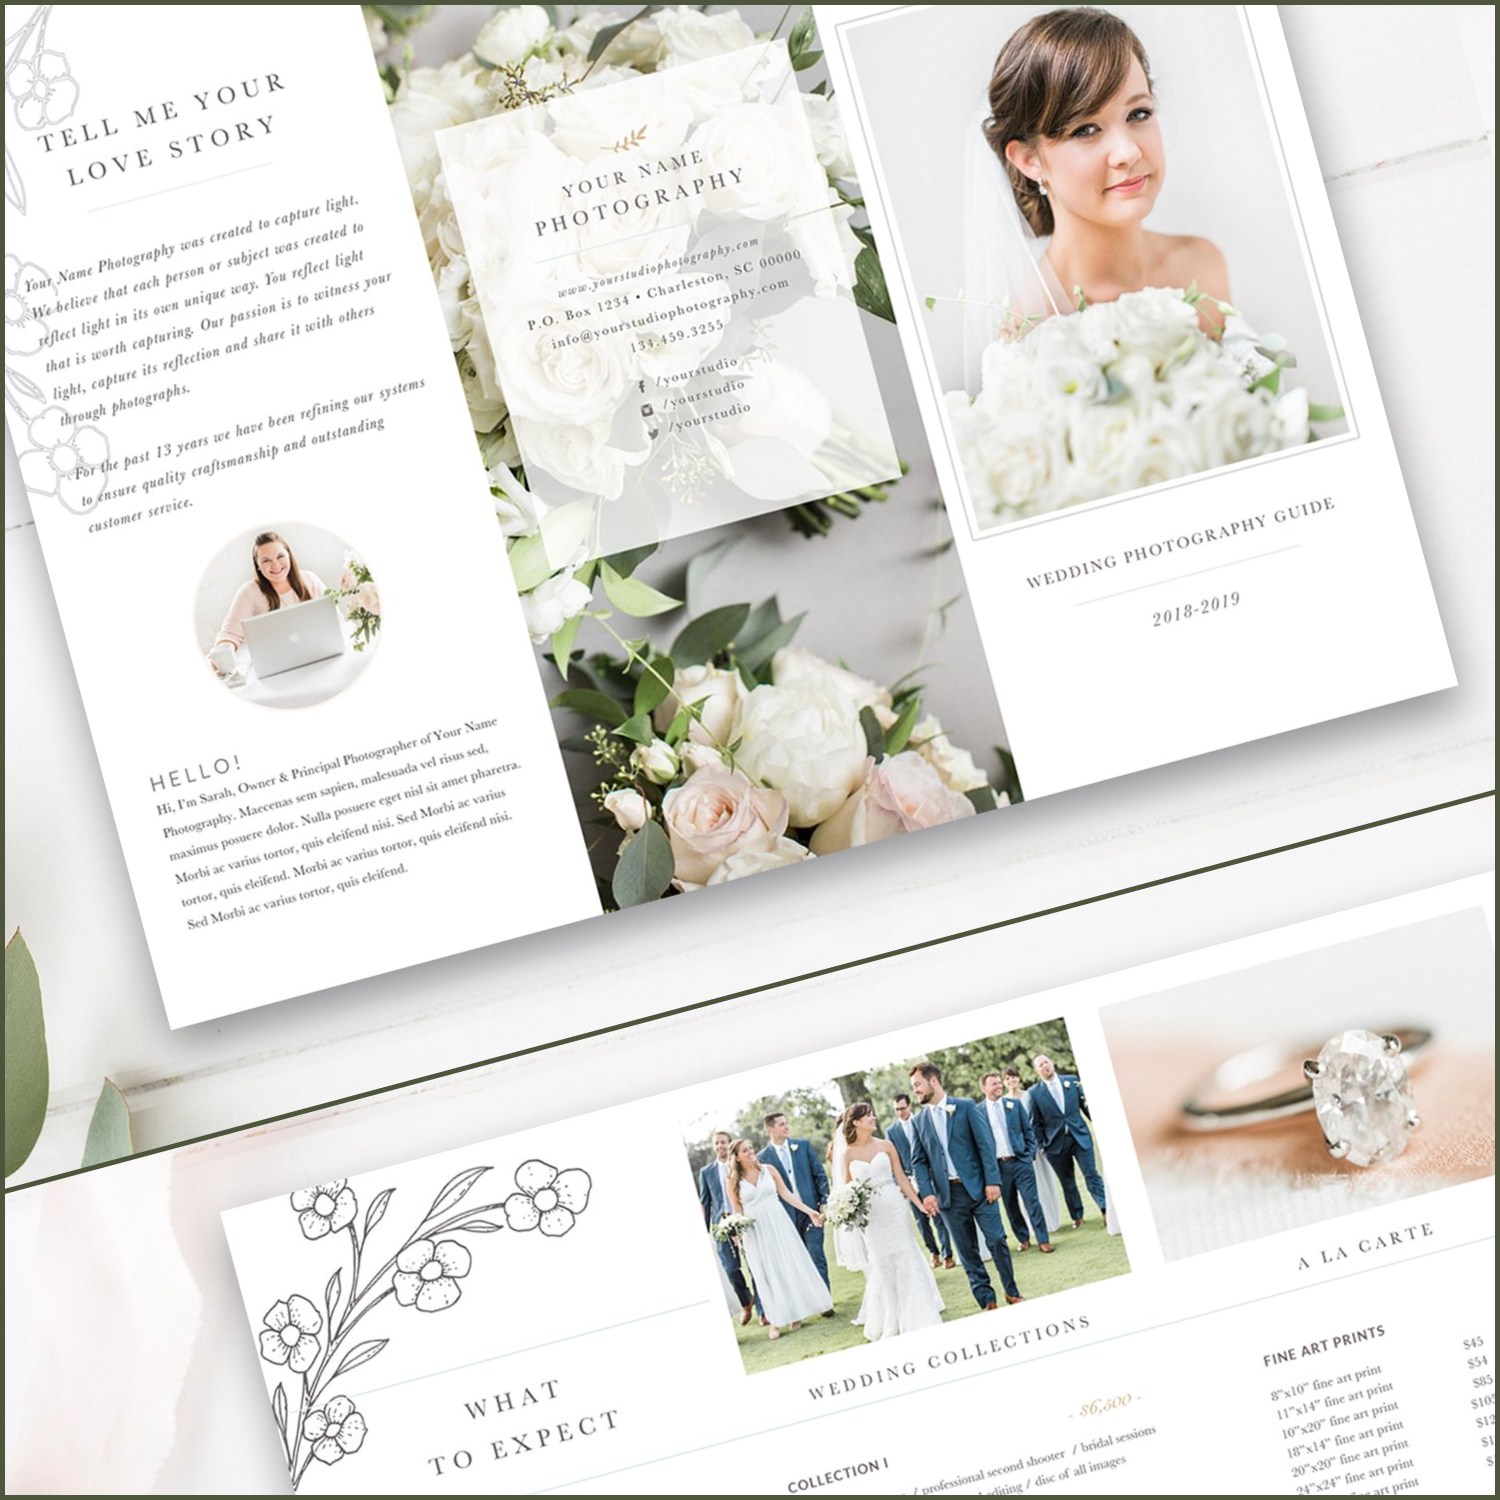 Prints of wedding photography trifold.